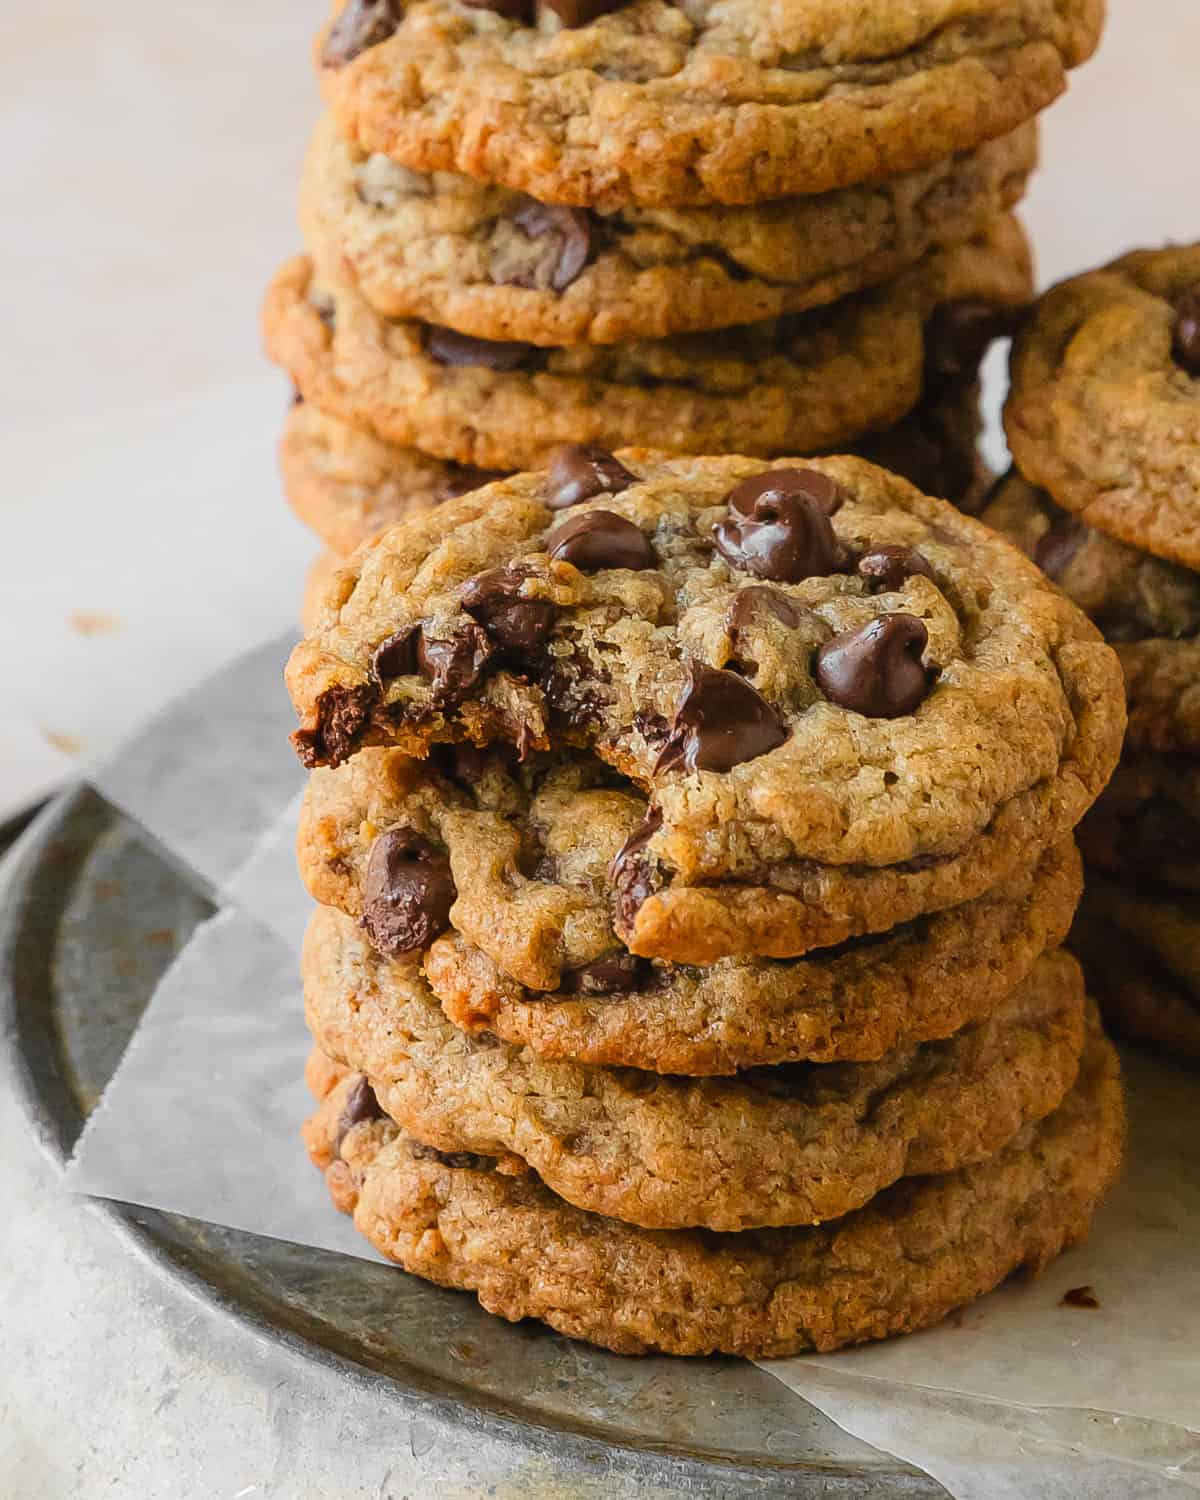 Banana chocolate chip cookies are moist banana bread cookies filled with melty chocolate chips. These chocolate chip banana cookies are soft and chewy with the perfect balance of cake like texture. What I love most about these brown butter banana chocolate chip cookies is how easy they are to make with minimal ingredients. They’re the perfect cozy cookie everyone will love!